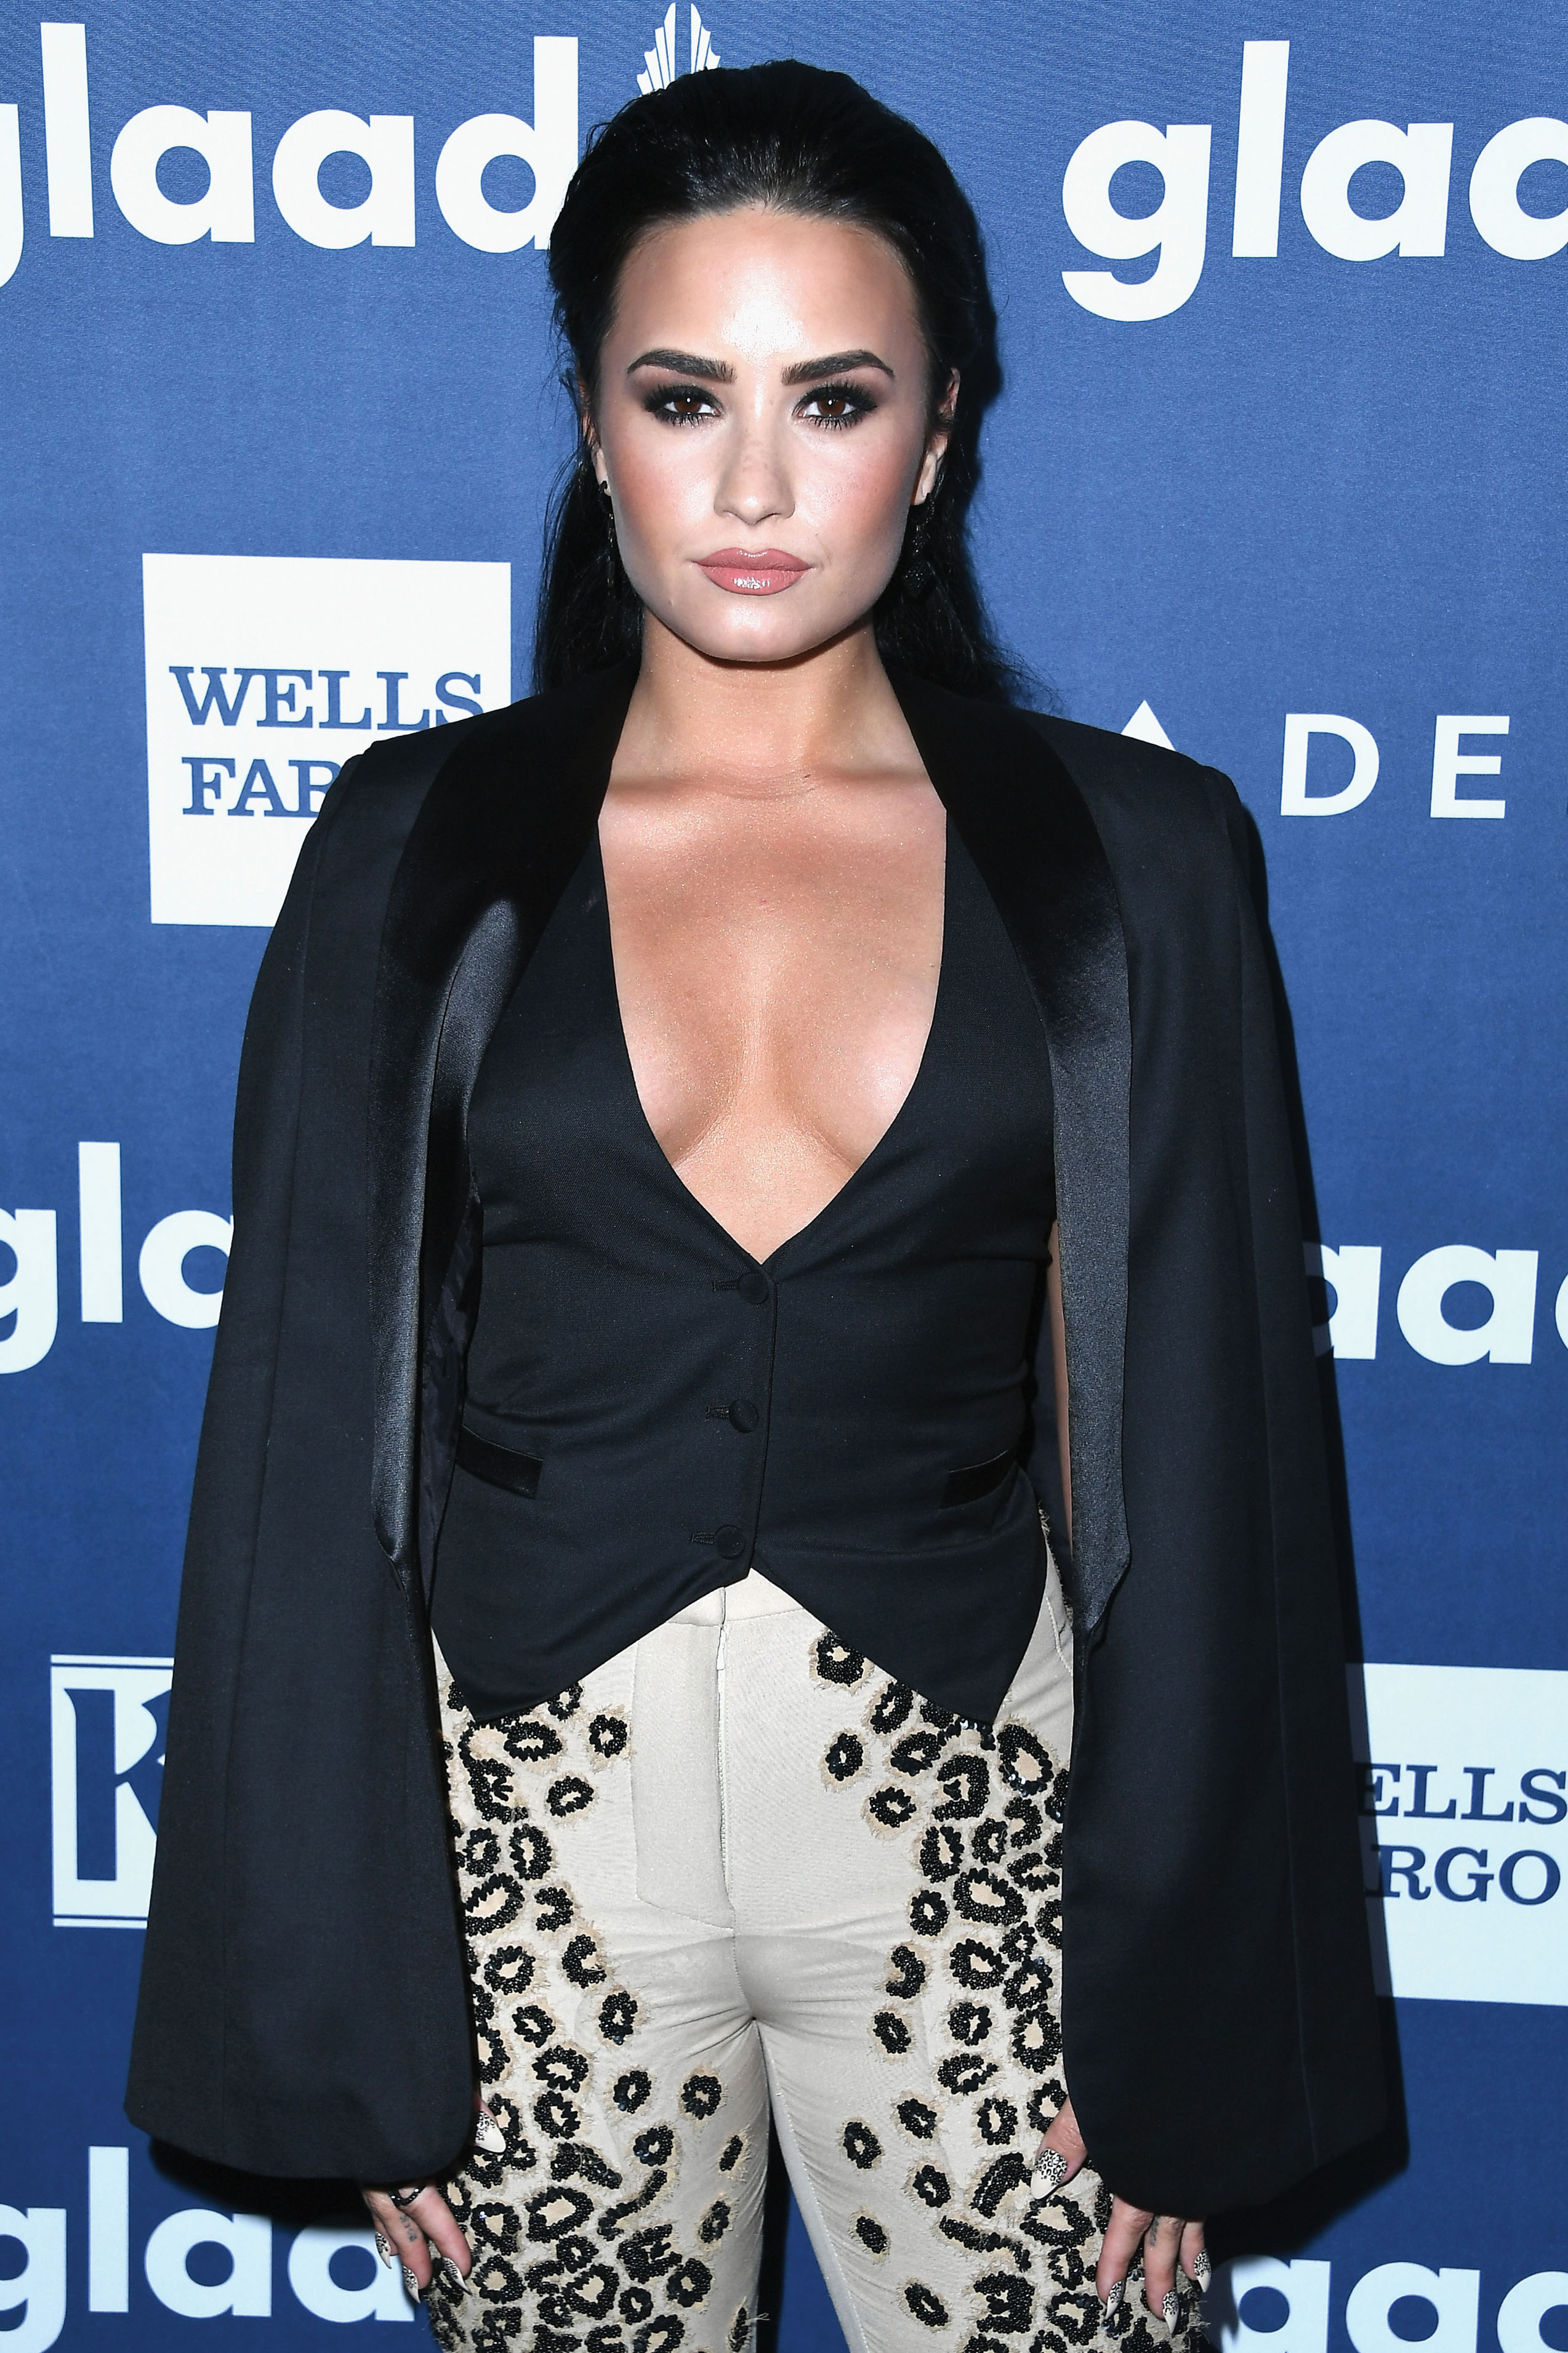 BEVERLY HILLS, CALIFORNIA - APRIL 02:  Honoree Demi Lovato attends the 27th Annual GLAAD Media Awards at the Beverly Hilton Hotel on April 2, 2016 in Beverly Hills, California.  (Photo by Steve Granitz/WireImage)